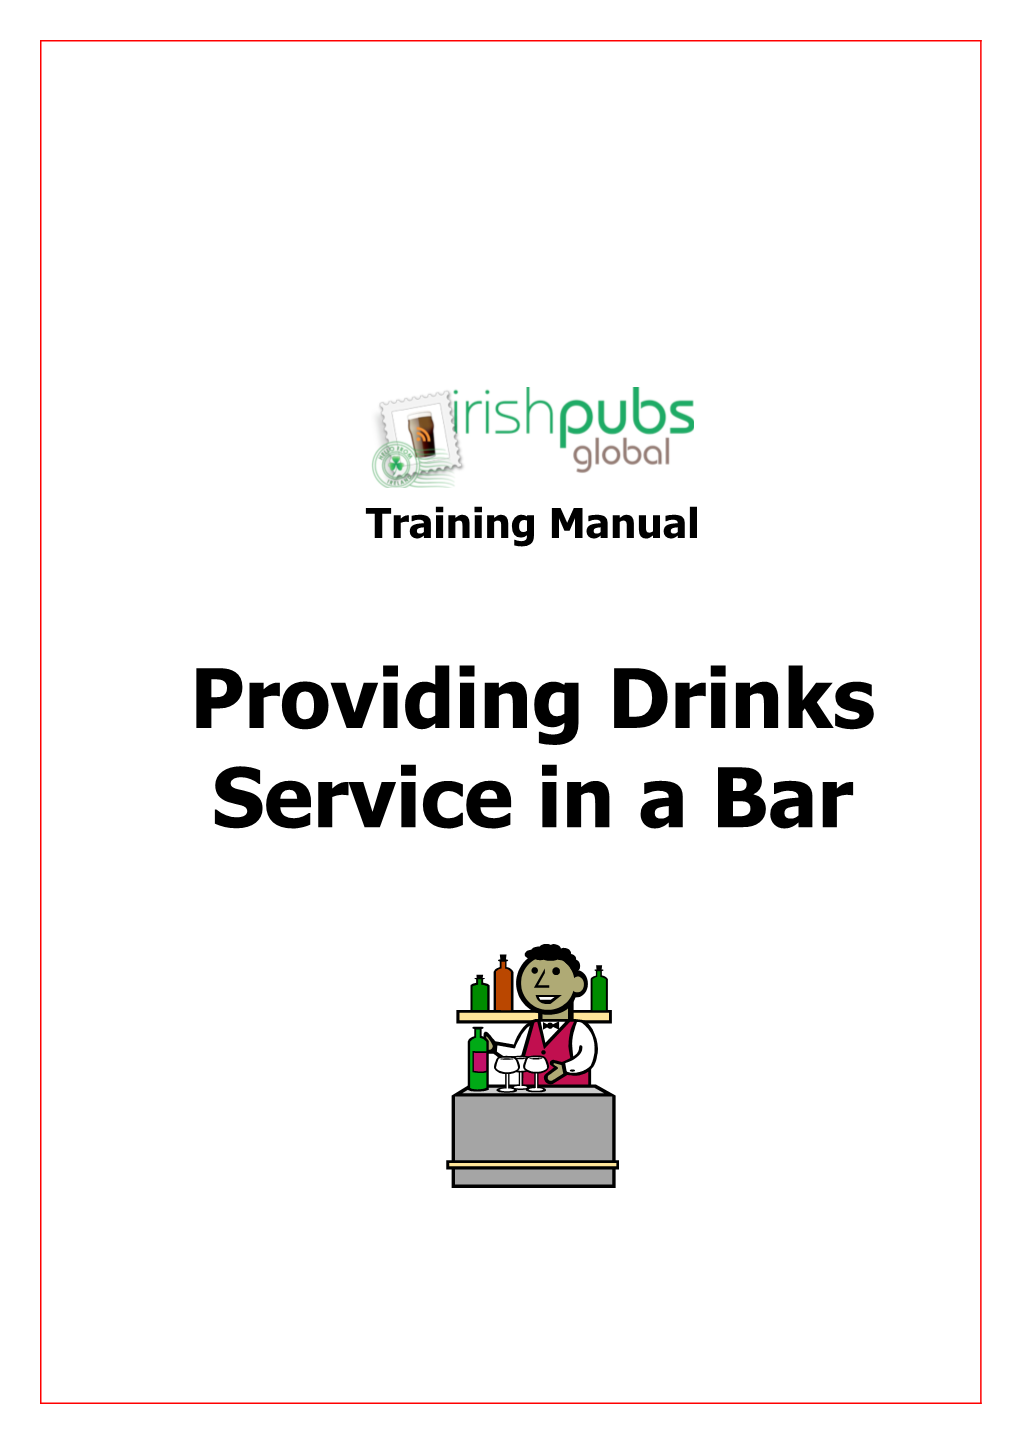 Providing Drinks Service in a Bar